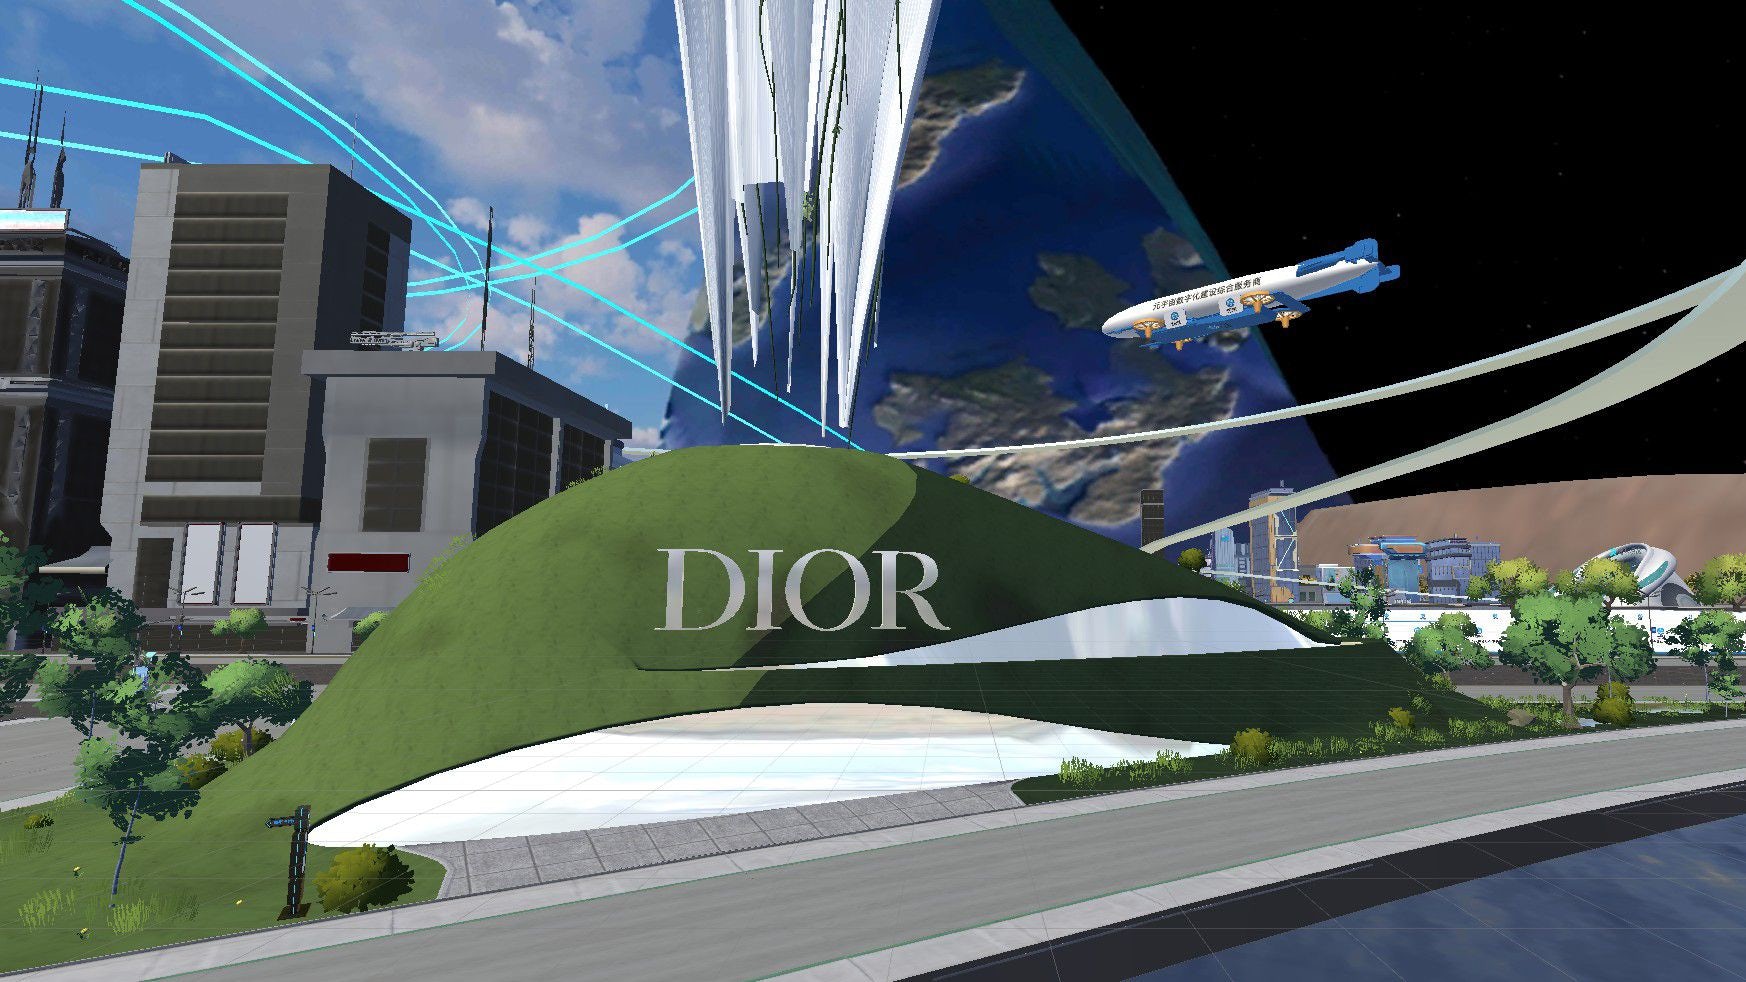 Dior Takes Its Chinaverse Presence To New Heights With Second Virtual Showcase